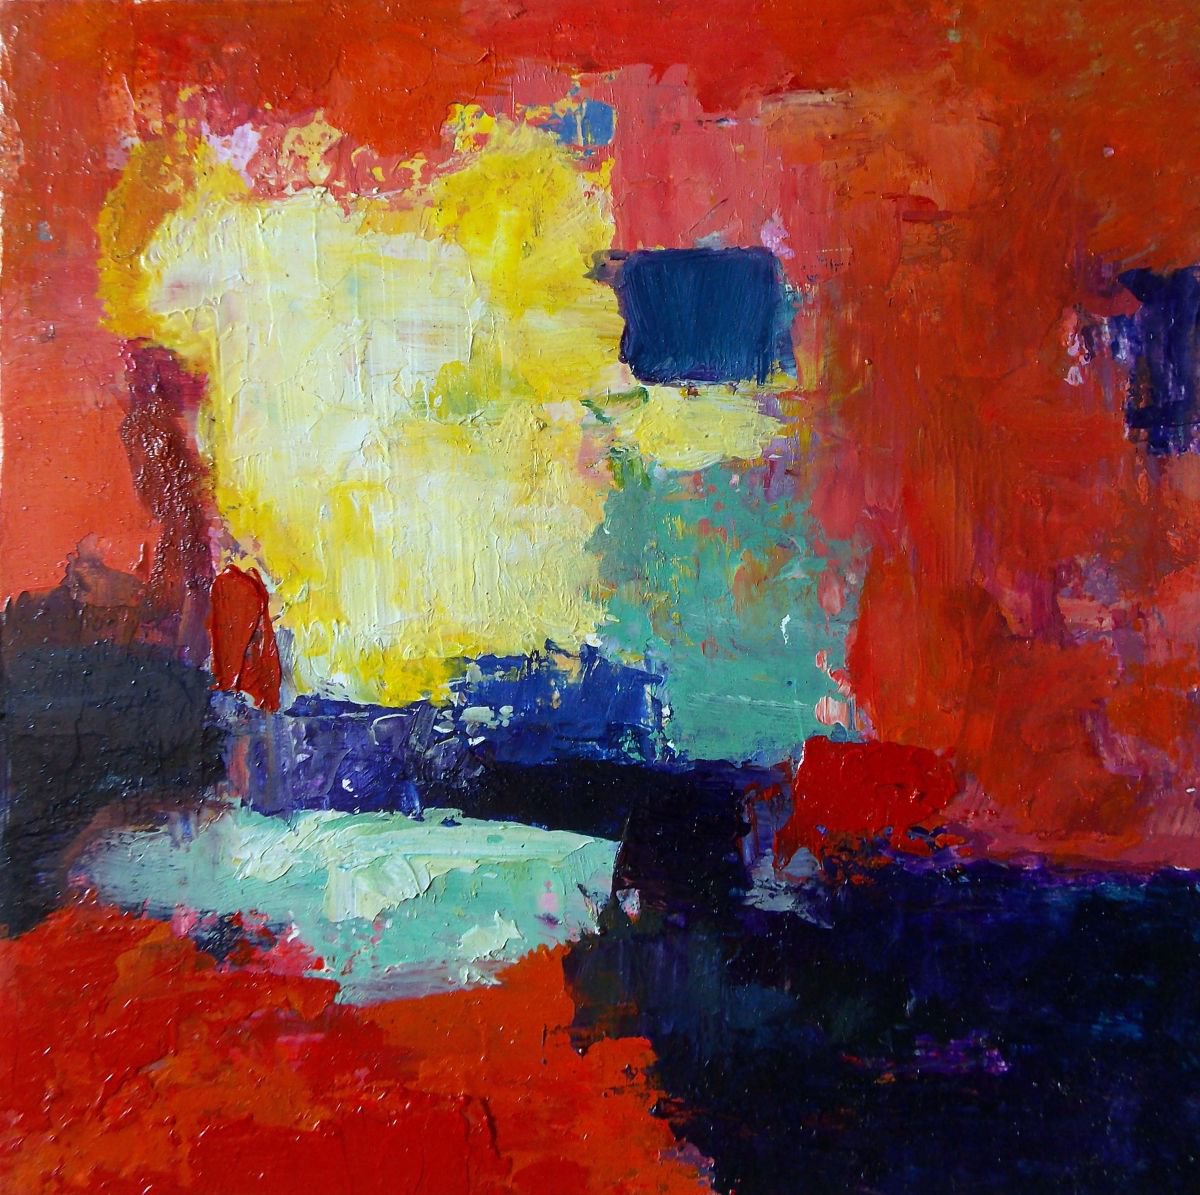 Red Original Abstract Oil Painting on Small Canvas Hardboard Panel - Red Harmony by Adriana Vasile